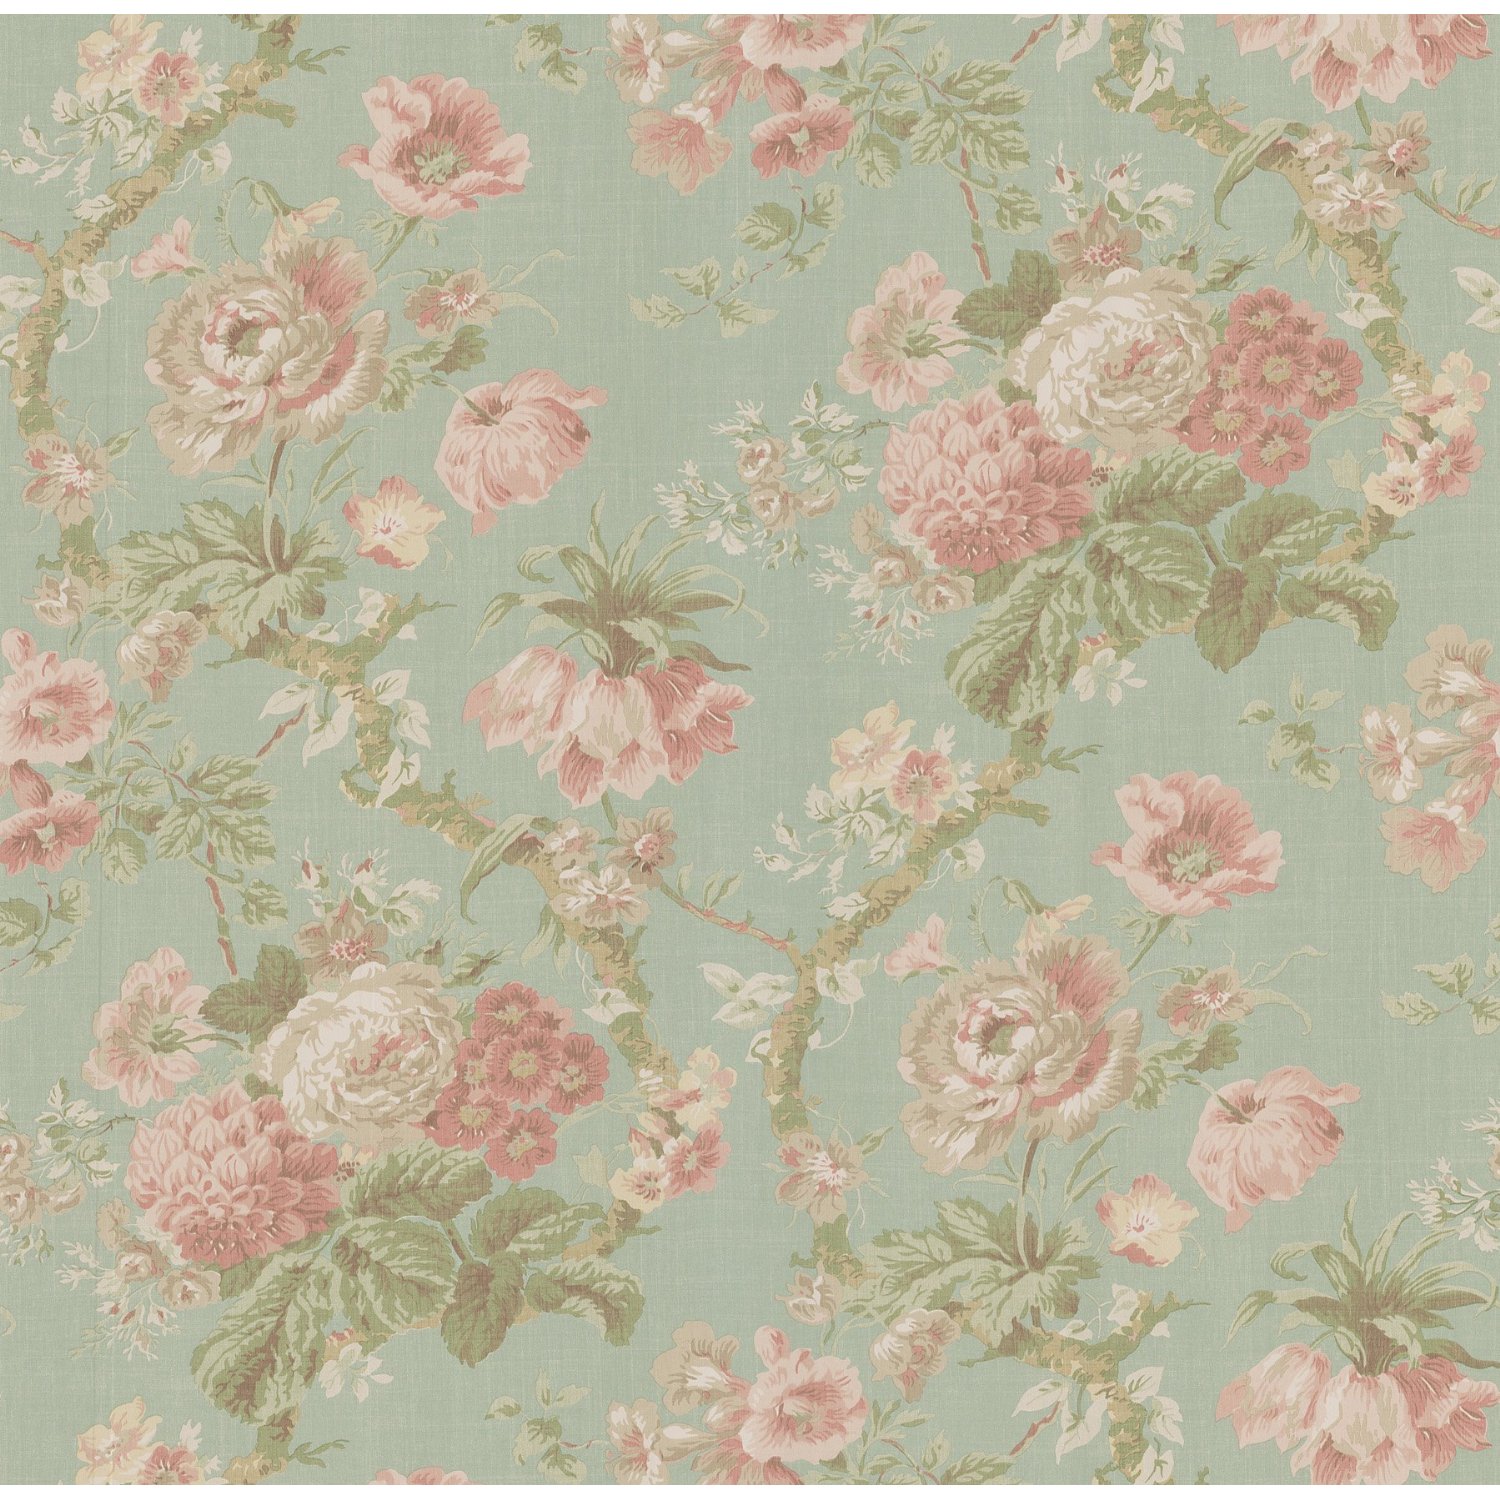 wallpaper vintage floral on This Vintage Floral Could Work But May Be Too Flowery